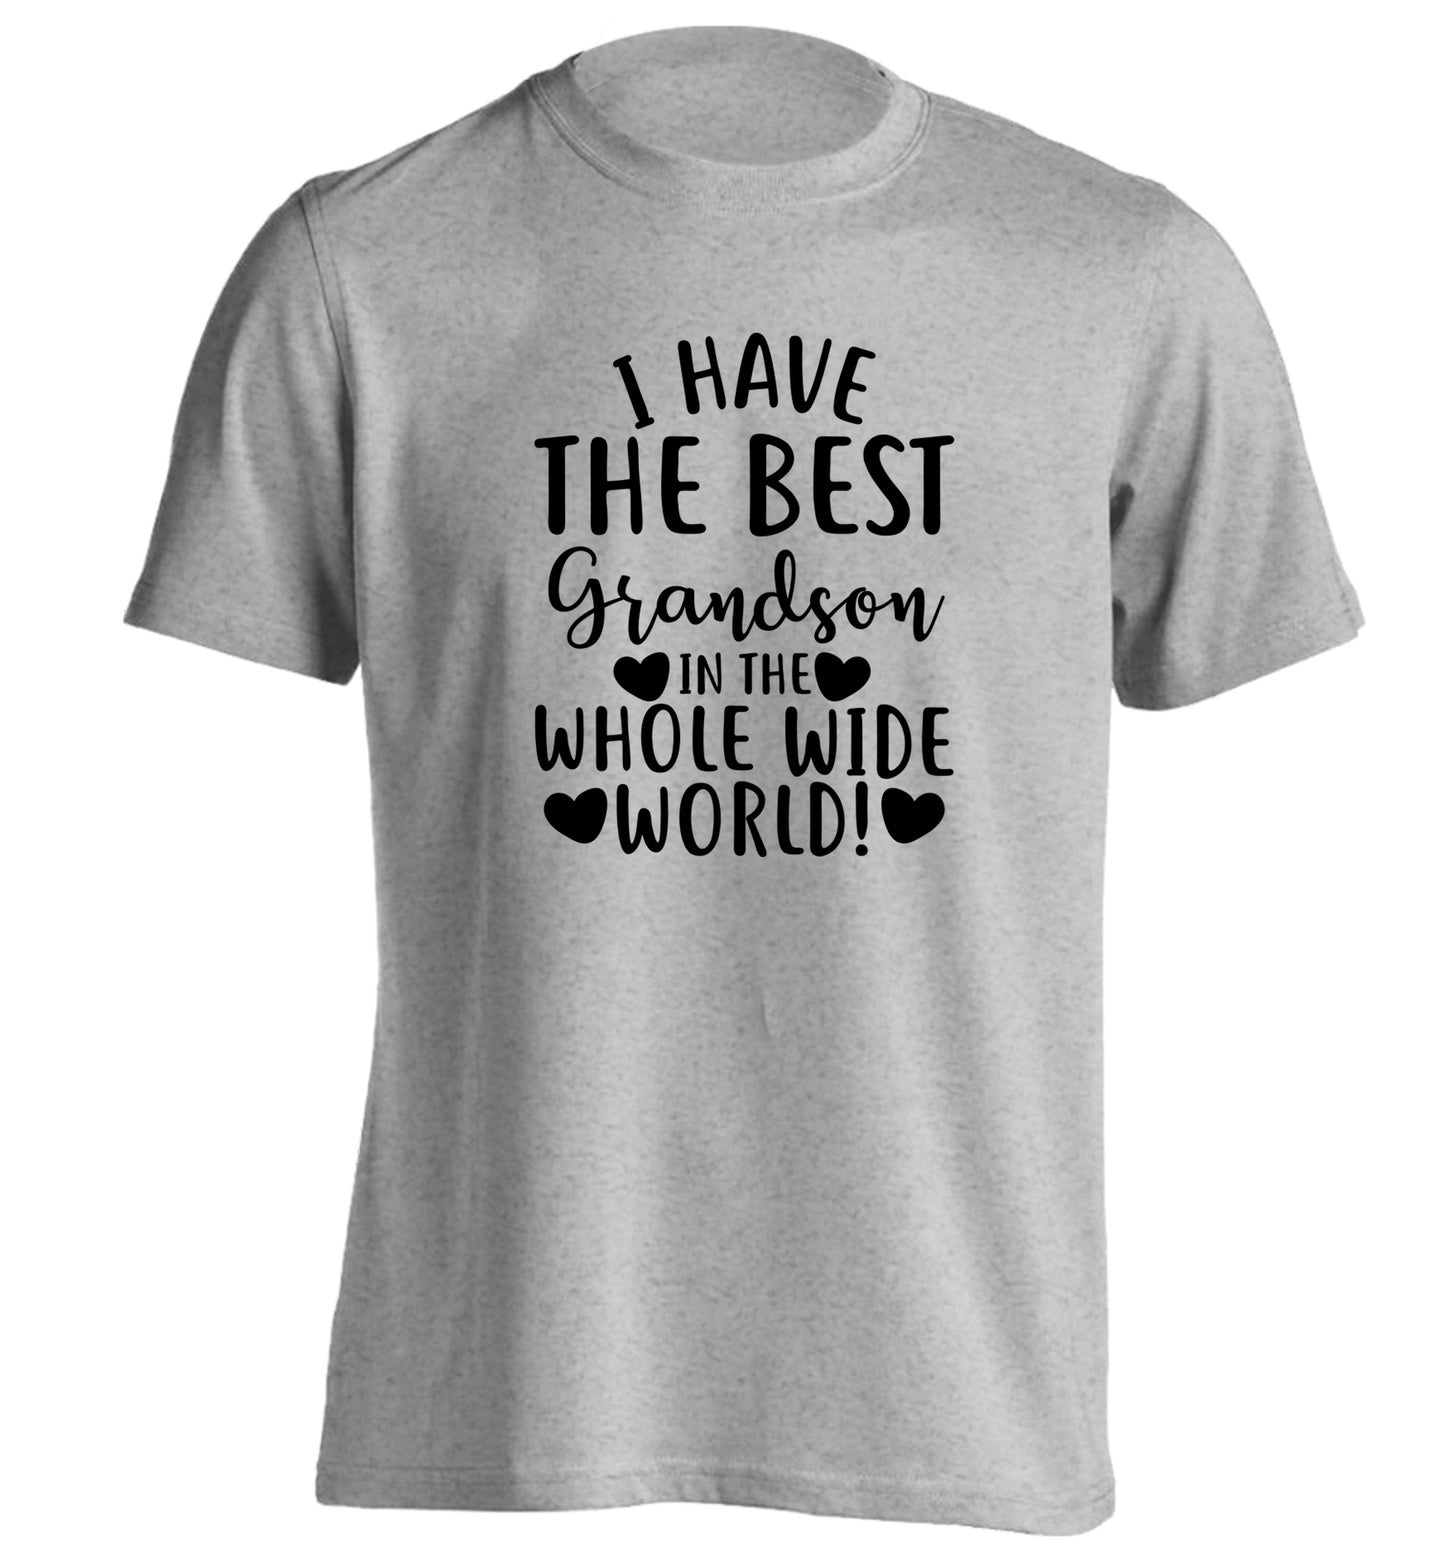 I have the best grandson in the whole wide world! adults unisex grey Tshirt 2XL